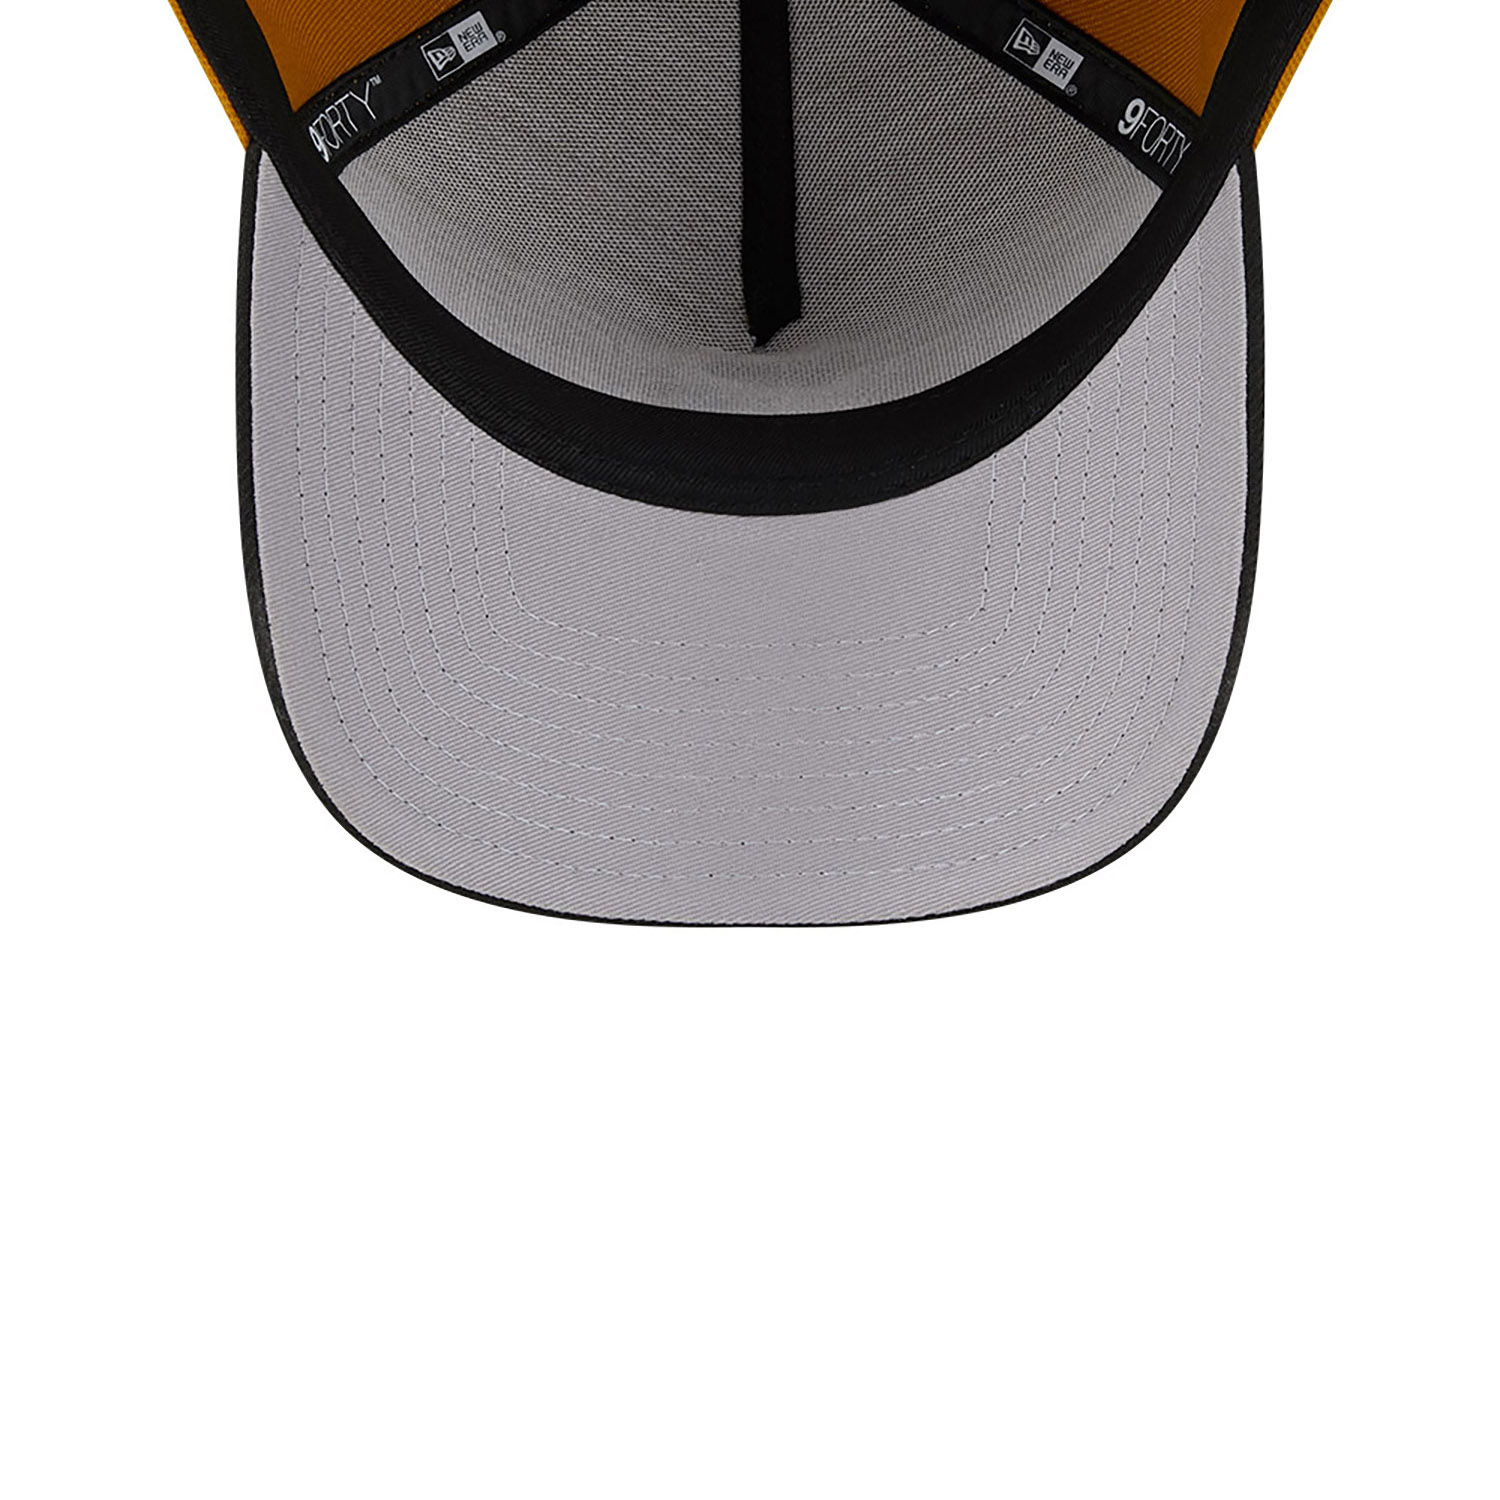 San Francisco Giants Rustic Fall Gold A-Frame 9FORTY Adjustable Cap